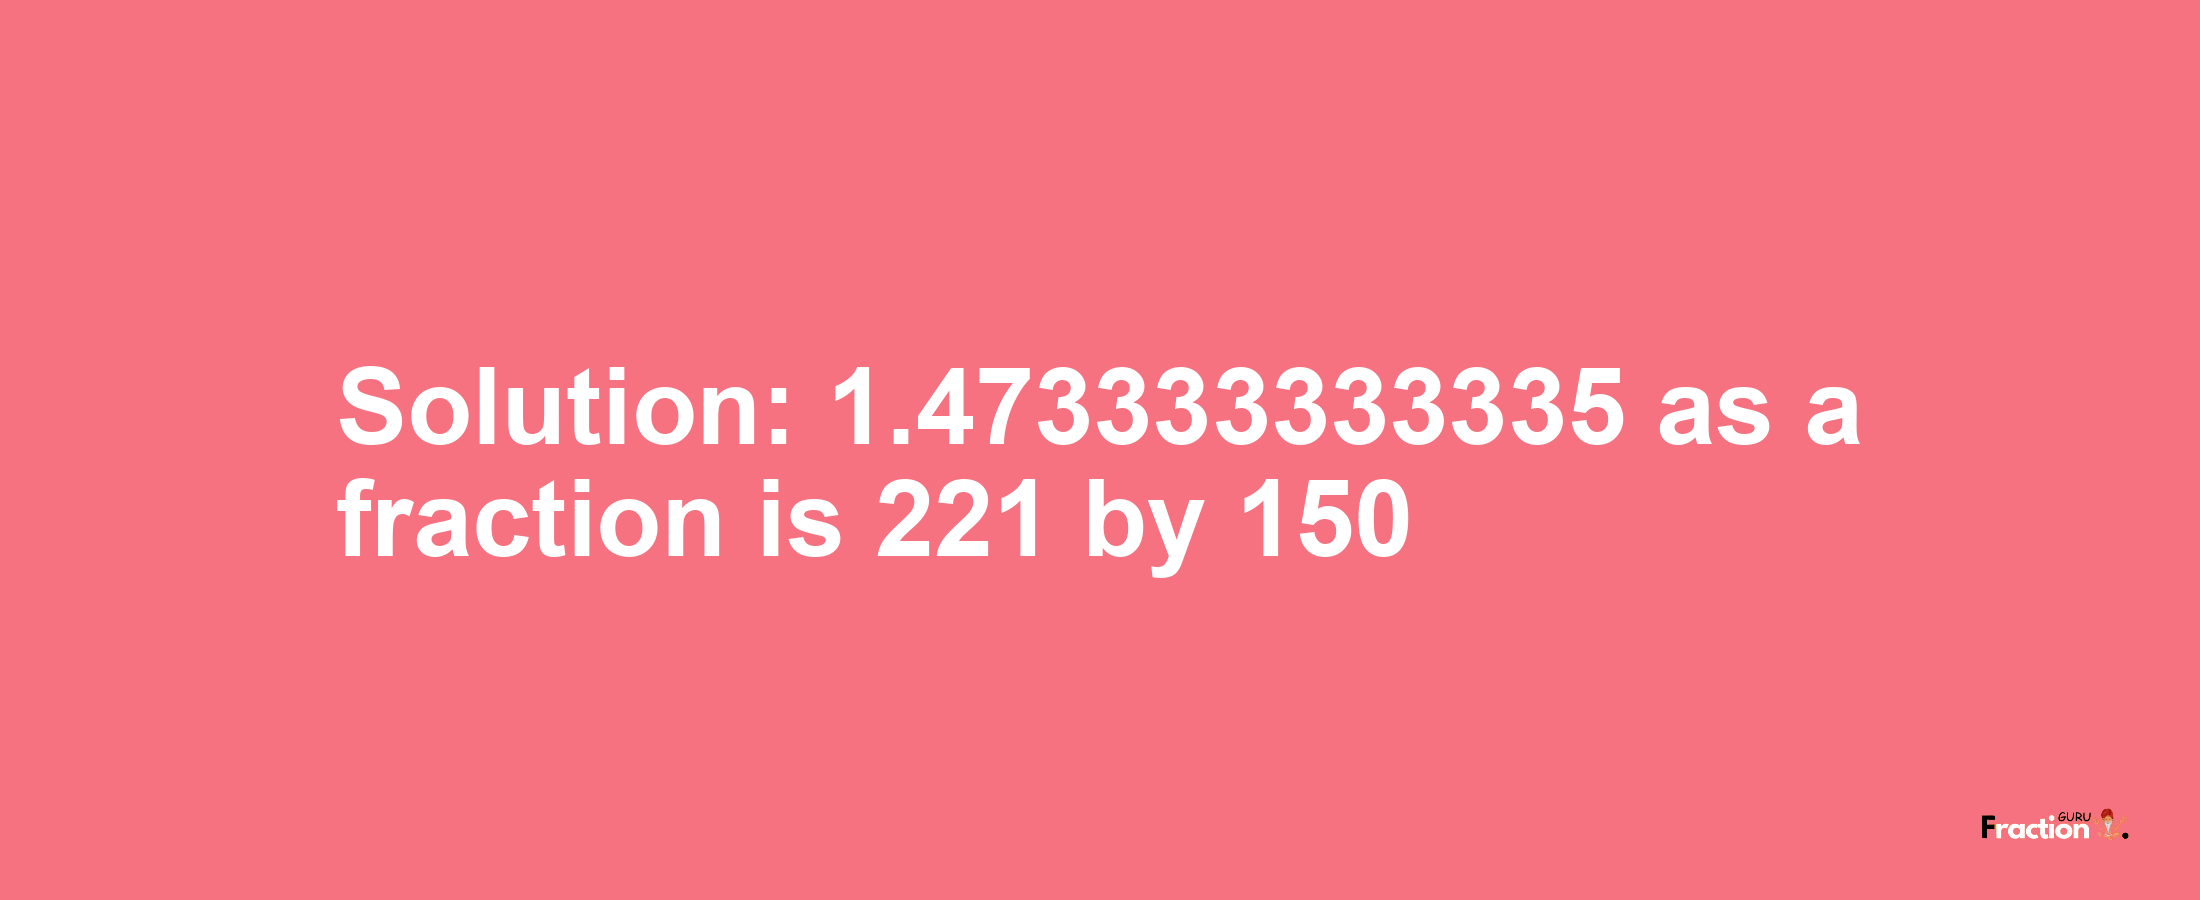 Solution:1.473333333335 as a fraction is 221/150